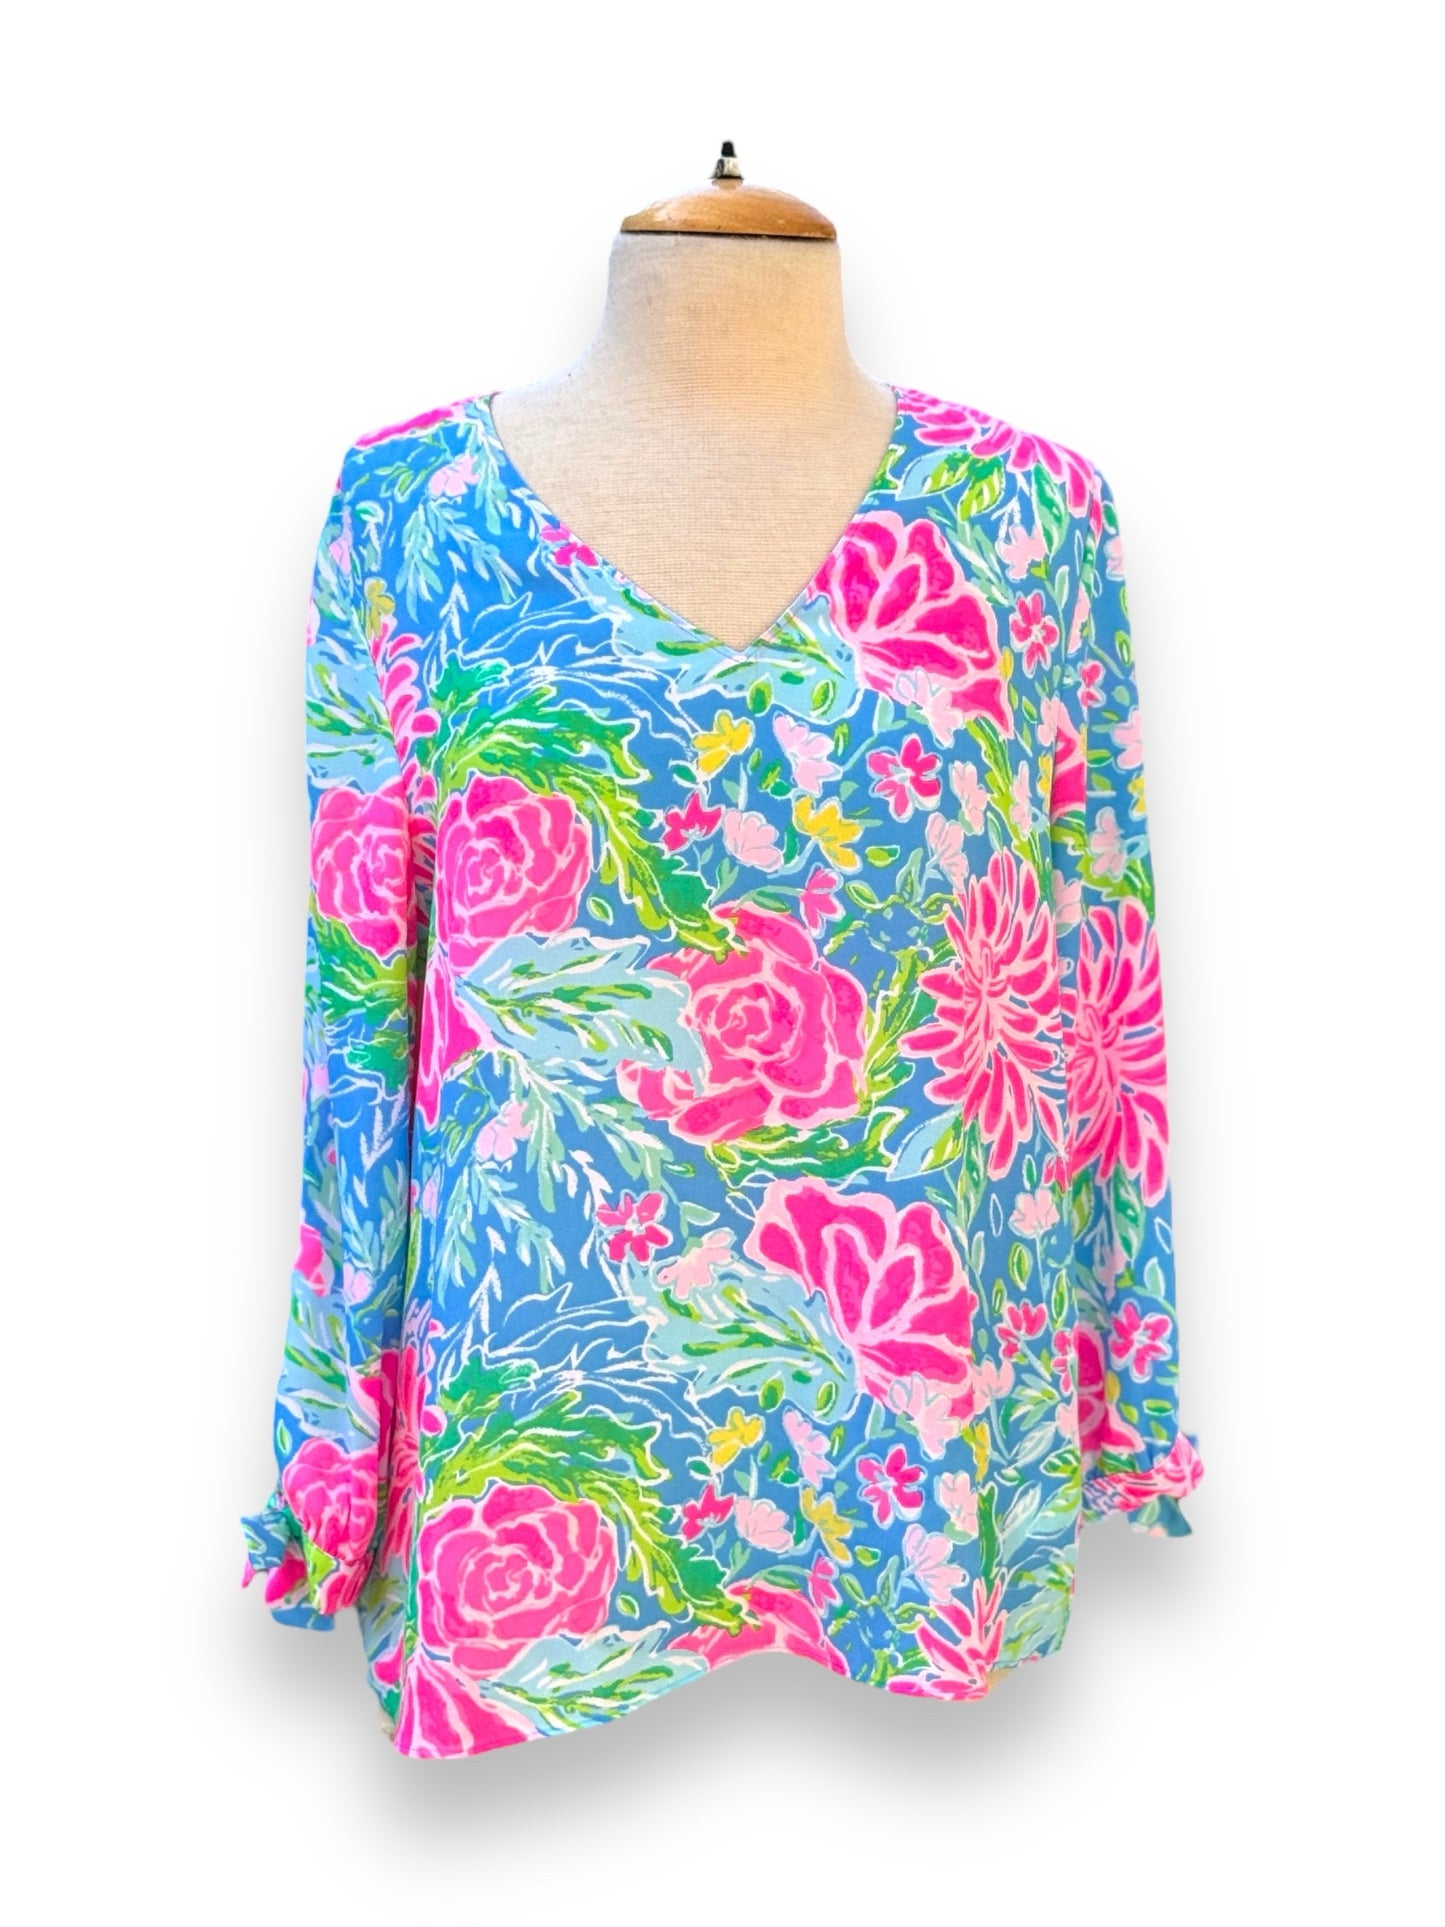 Size Sml/Med Lilly Pulitzer Pink Print Blouse